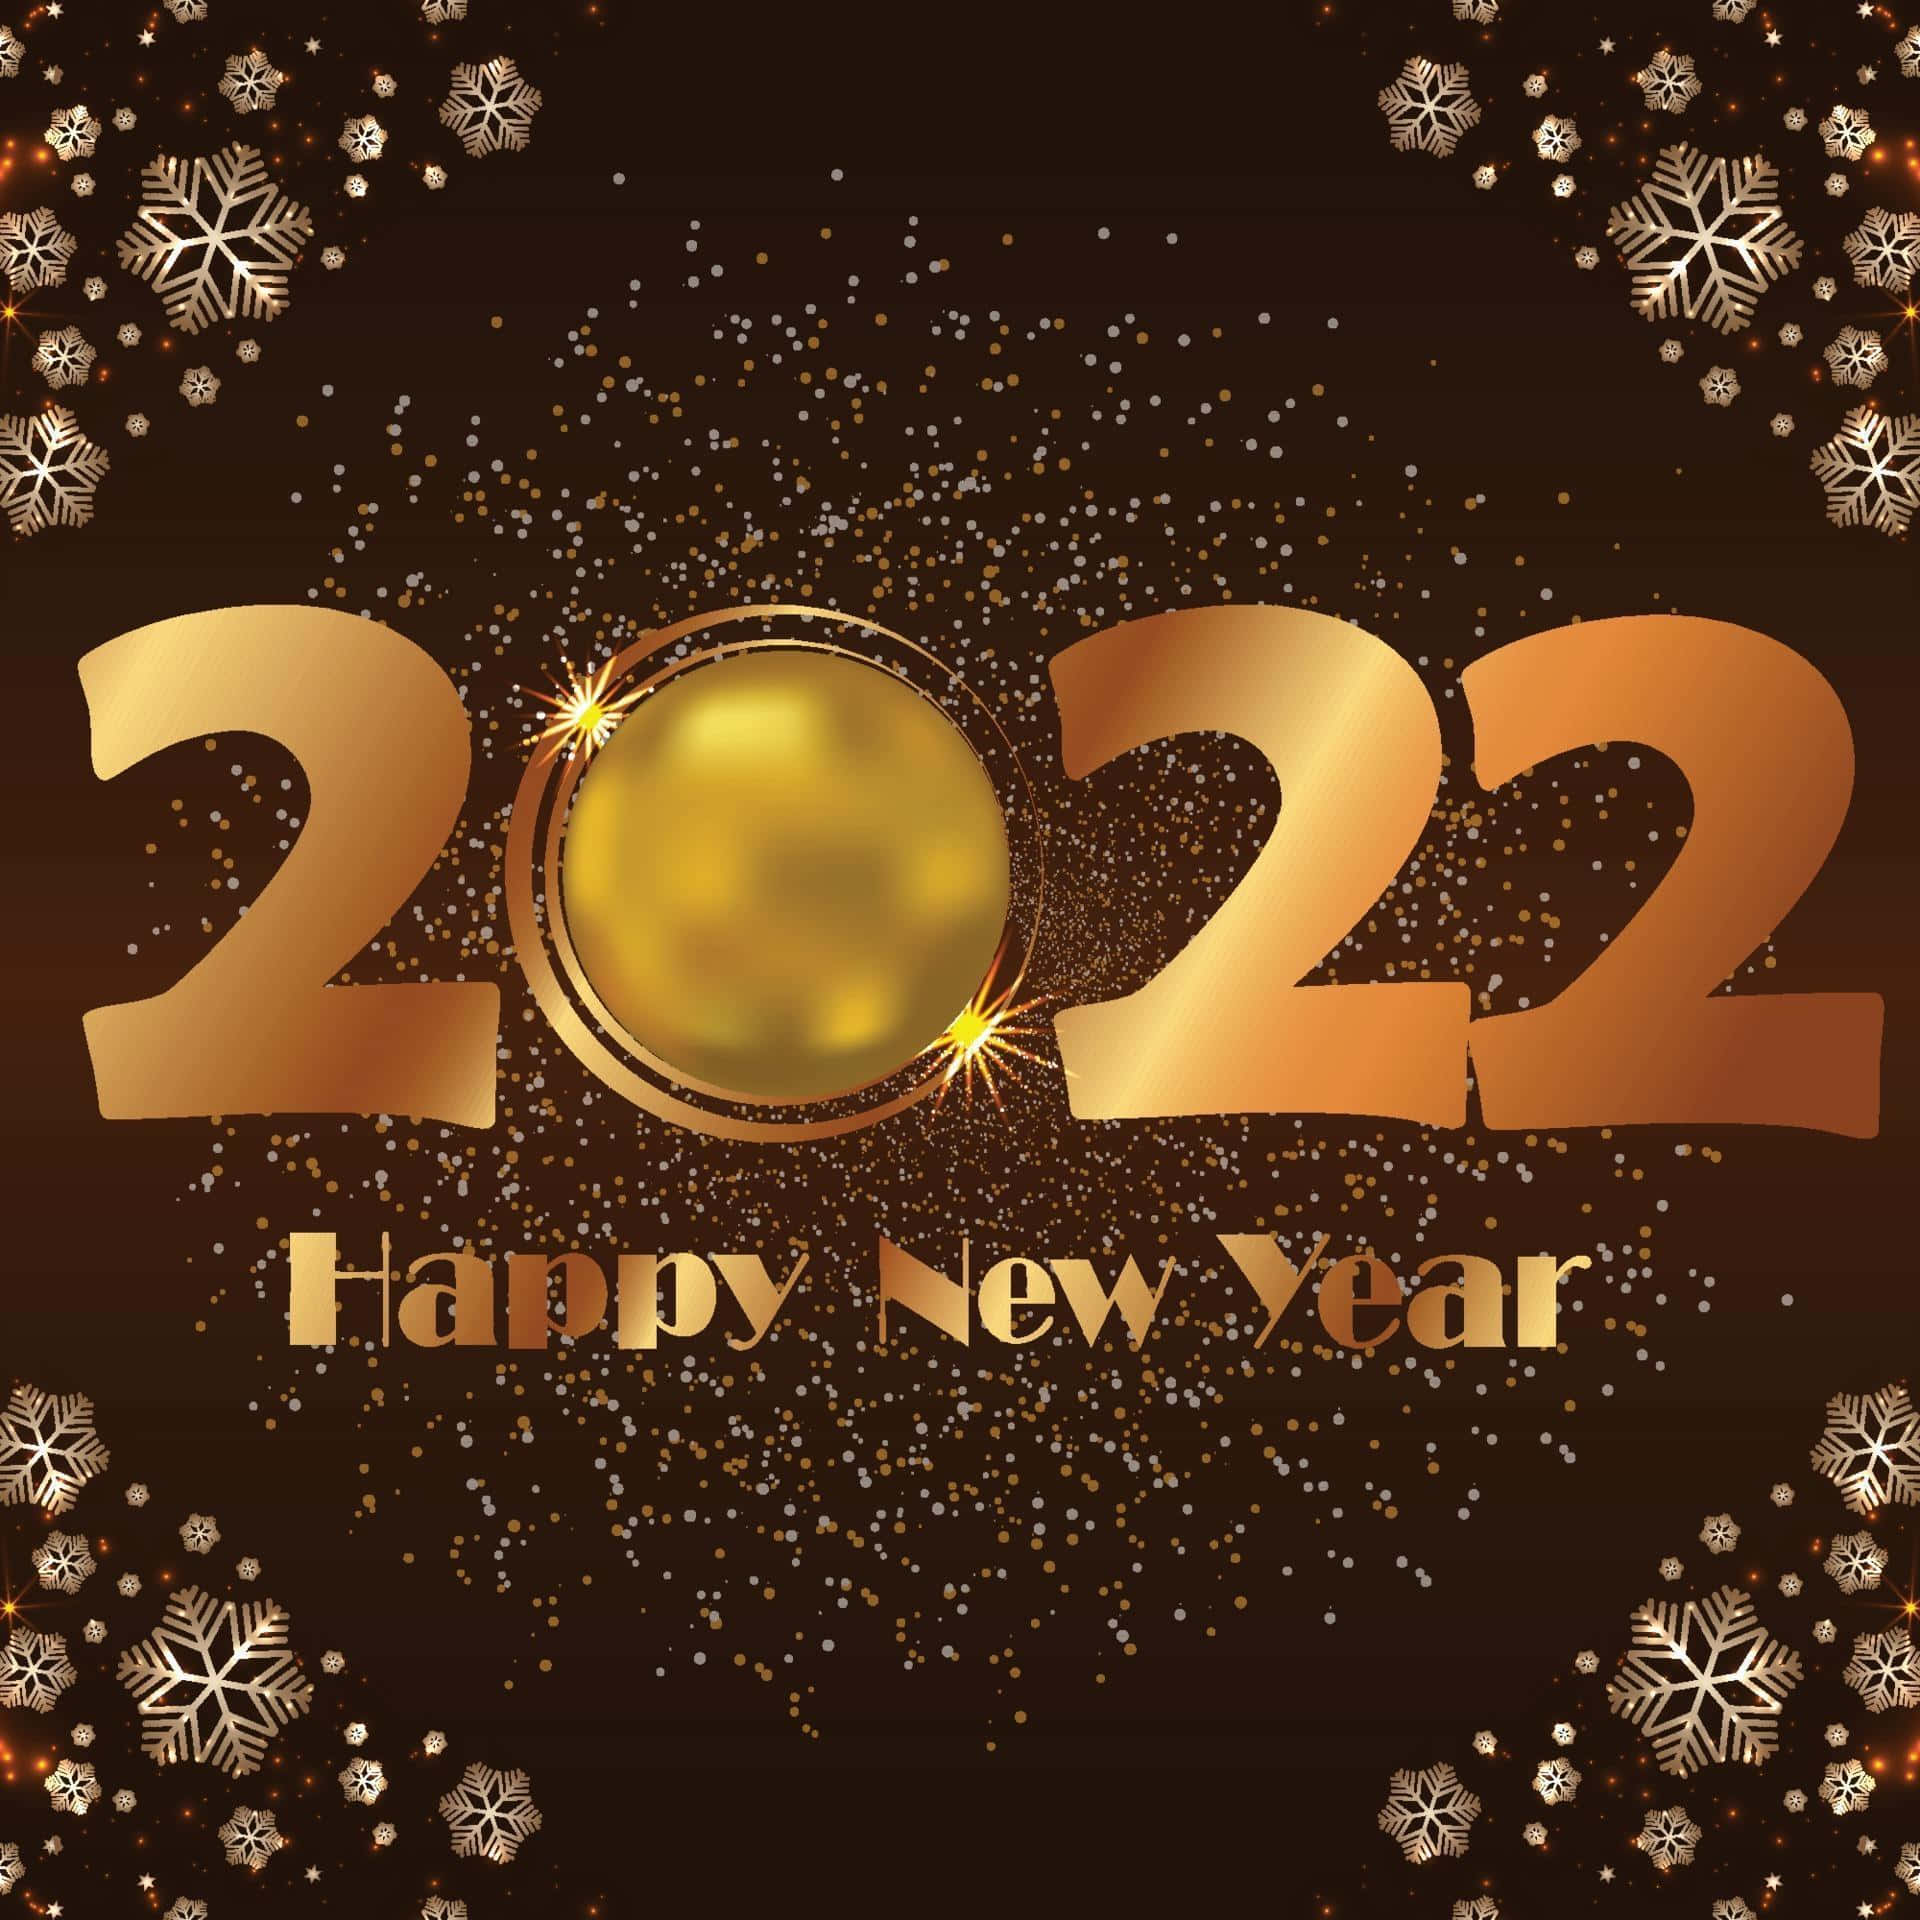 Happy New Year 2020 With Golden Background